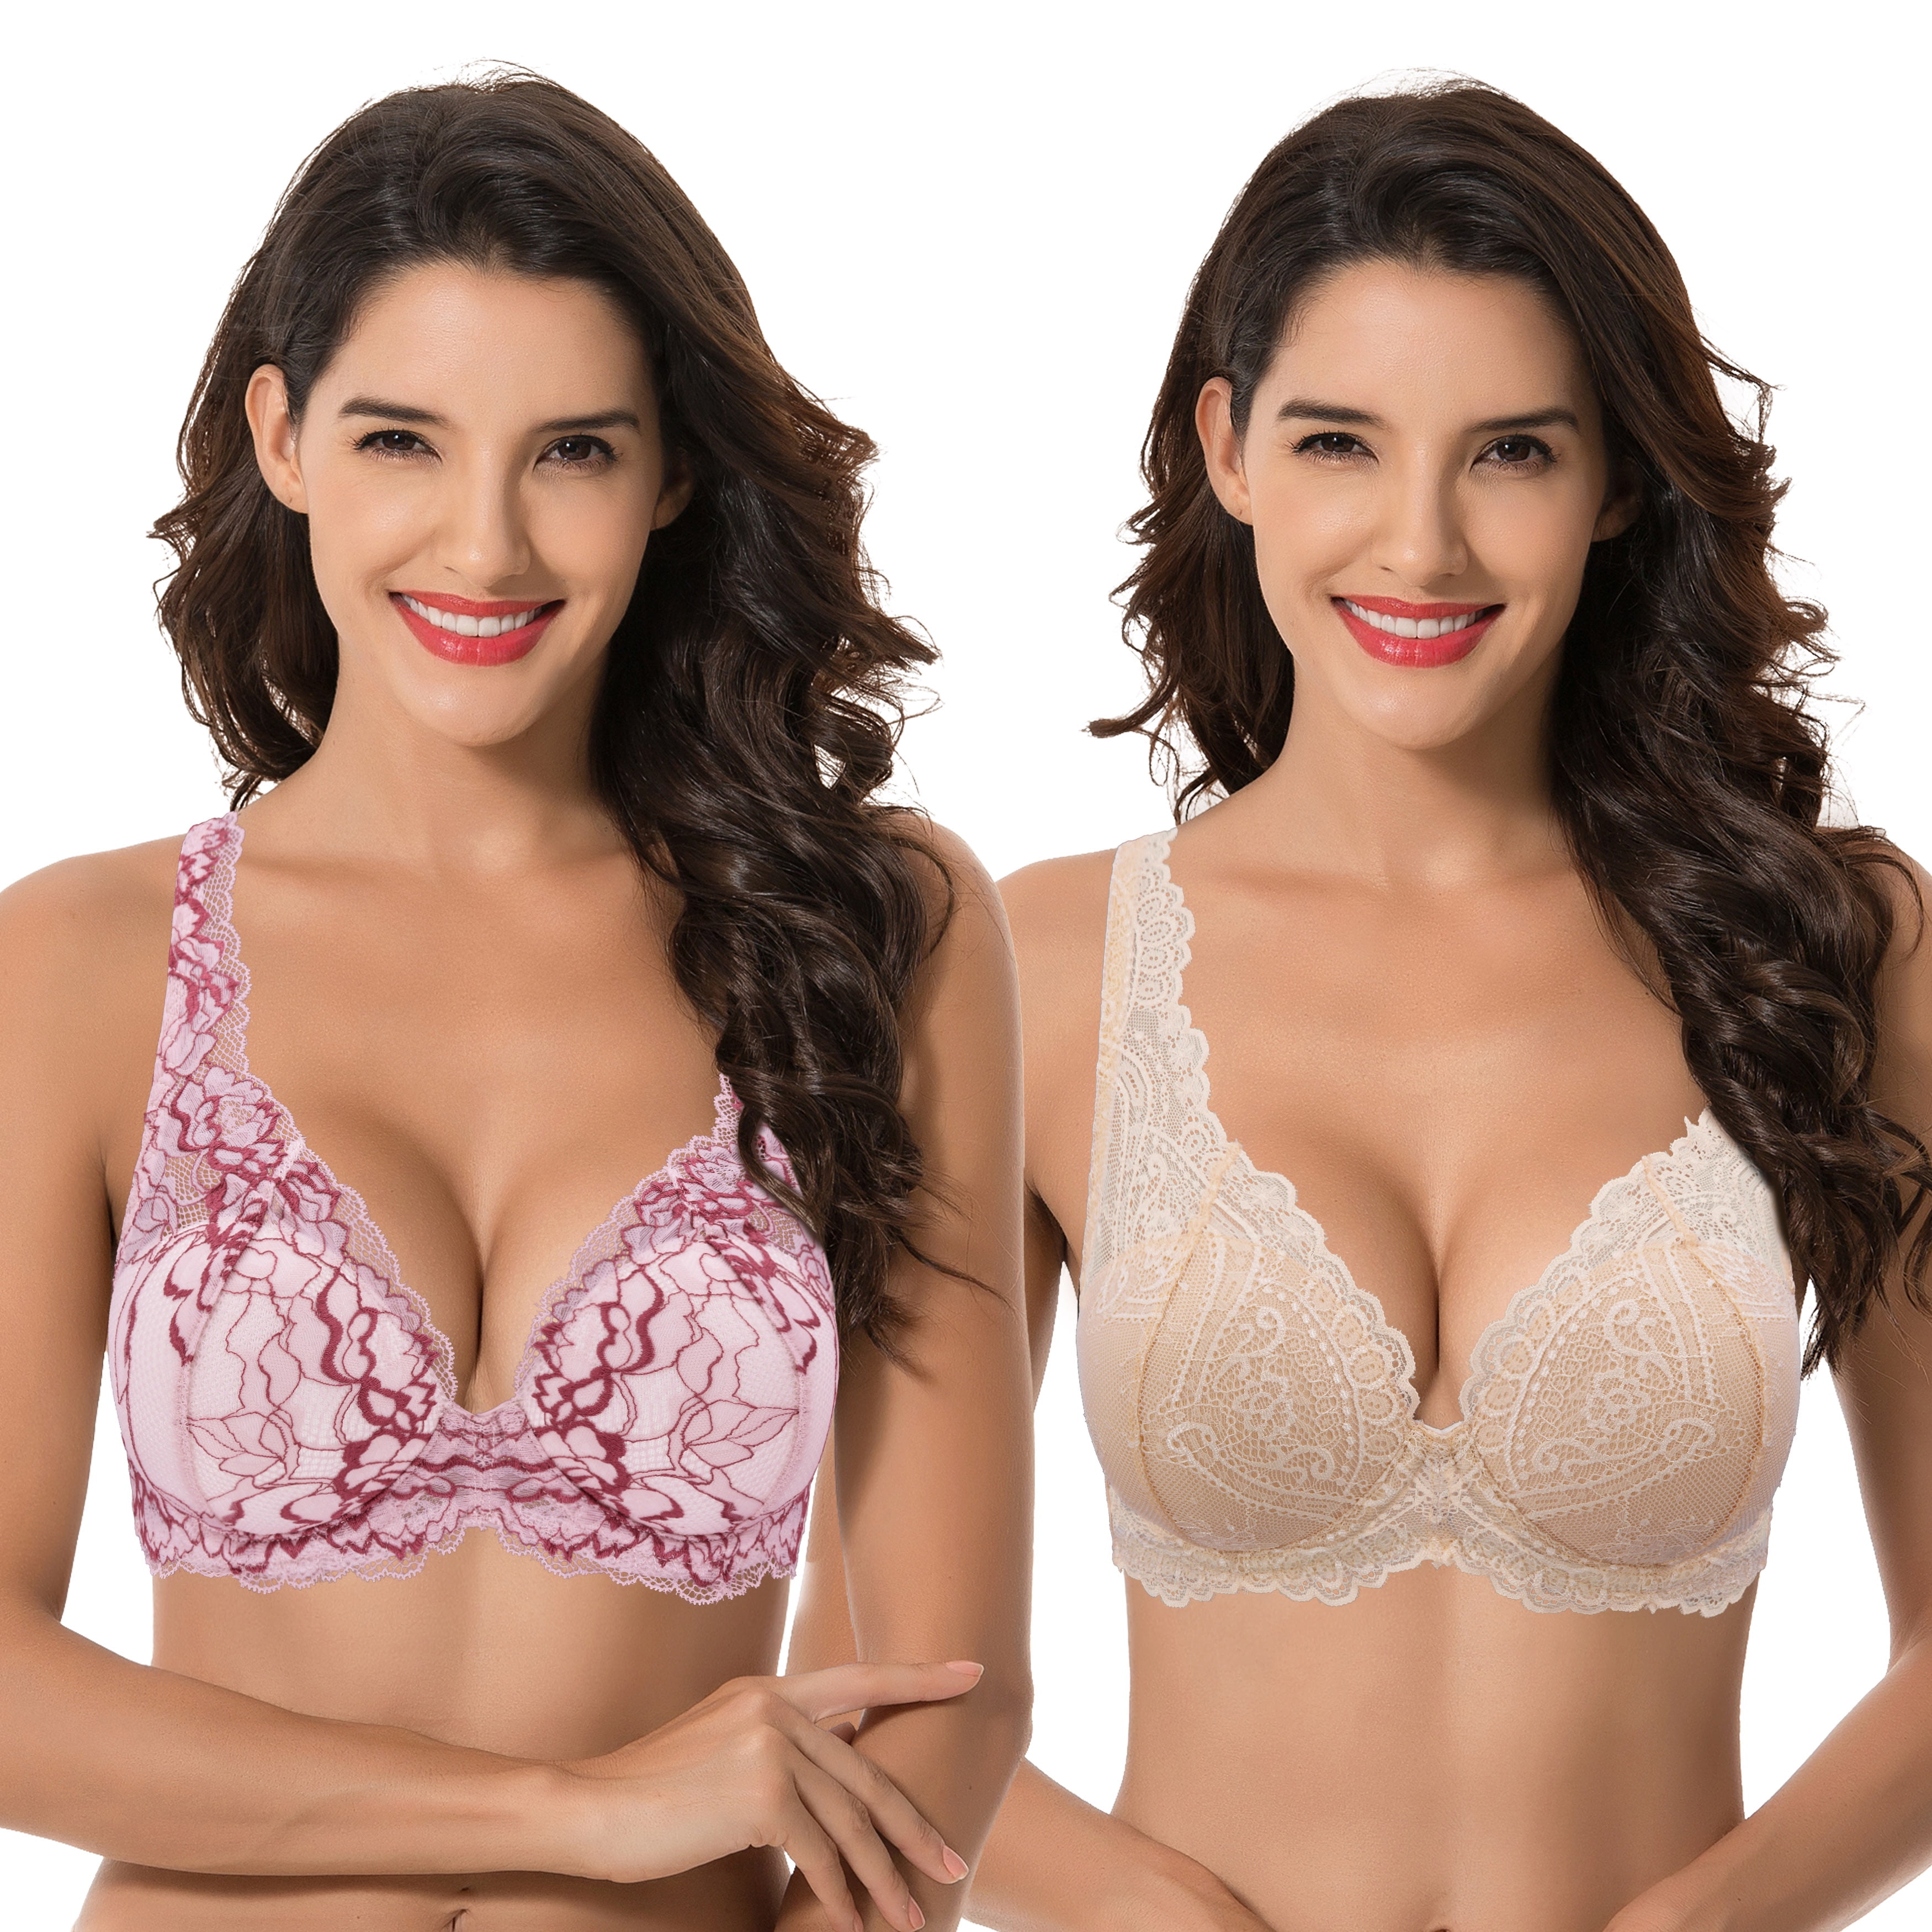 Curve Muse Women's Plus Size Perfect Shape Add 1 Cup Push Up Underwire Lace  Bras-2PK-RED,DARK BLUE-40C 